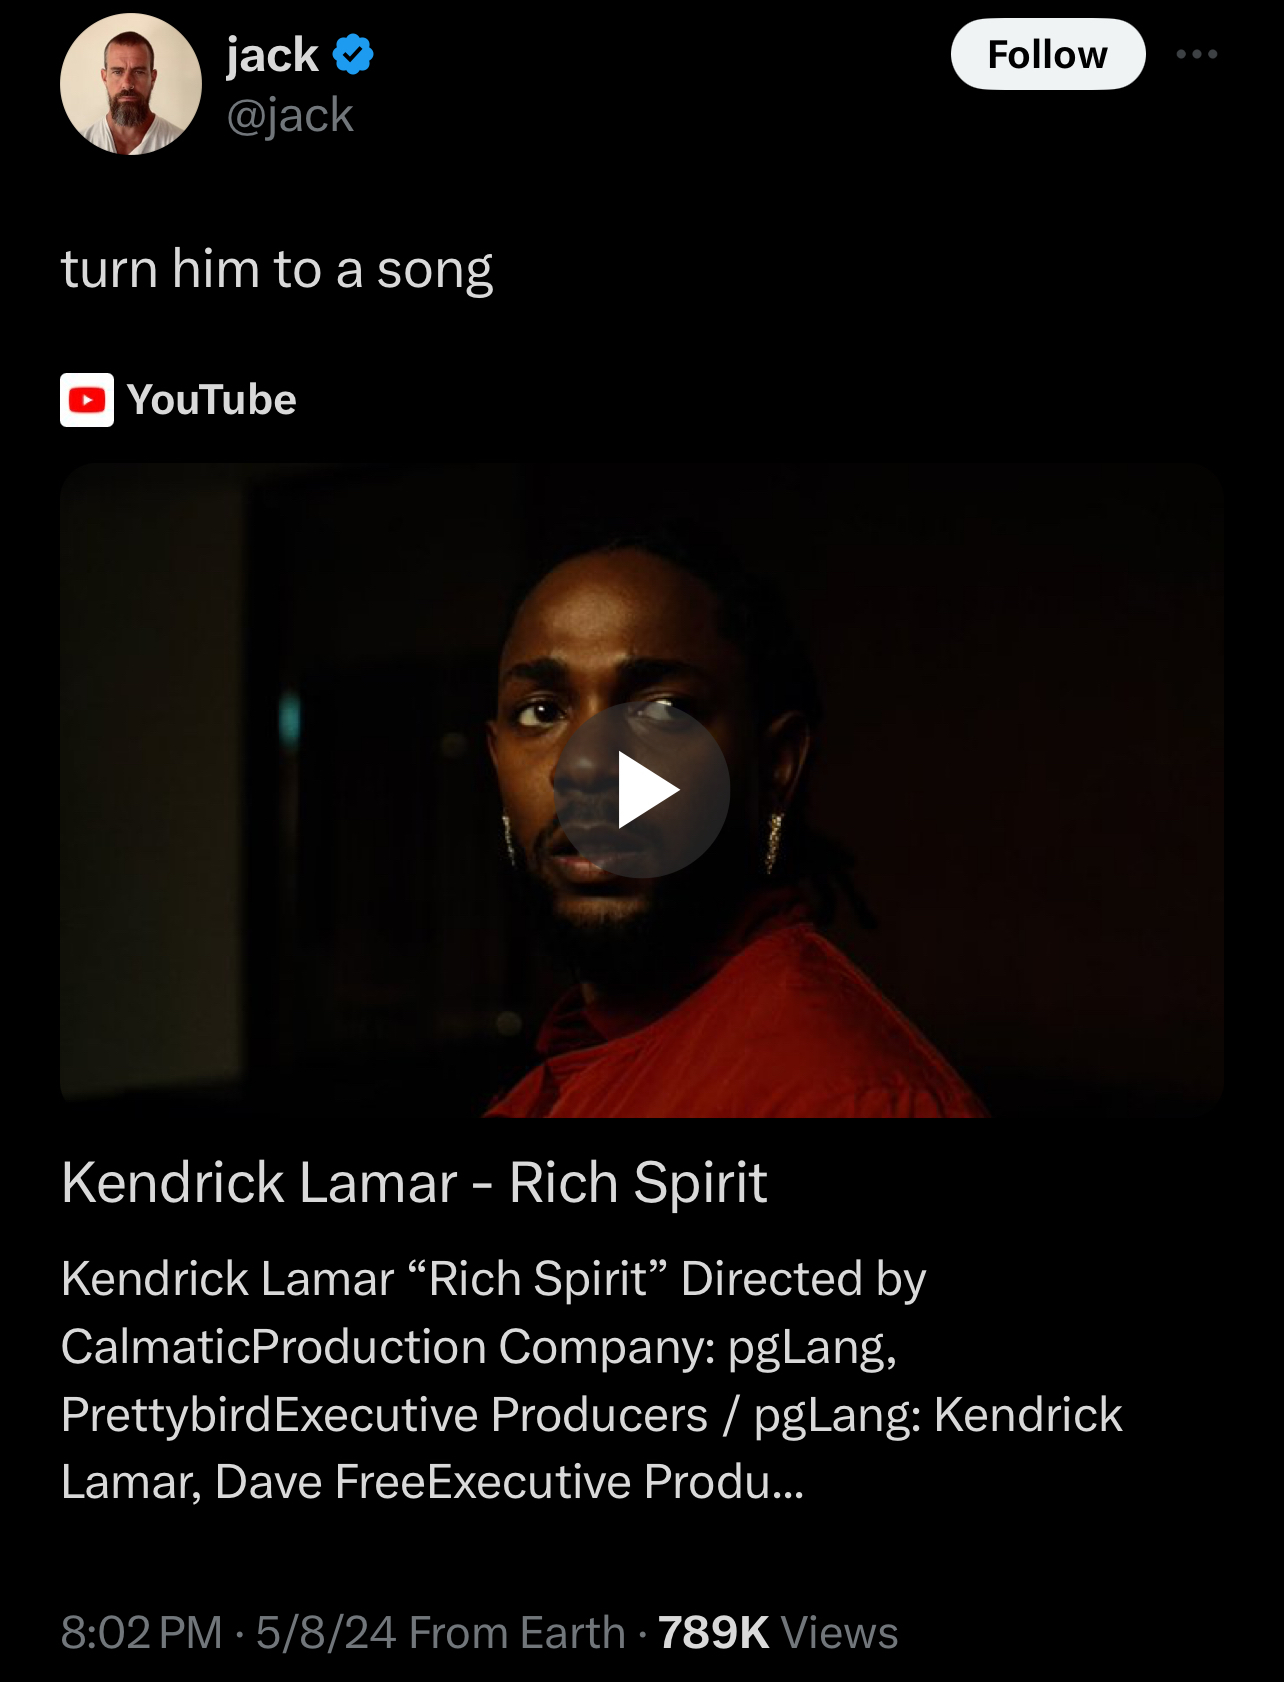 Kendrick Lamar in a music video thumbnail, looking at the camera with a serious expression